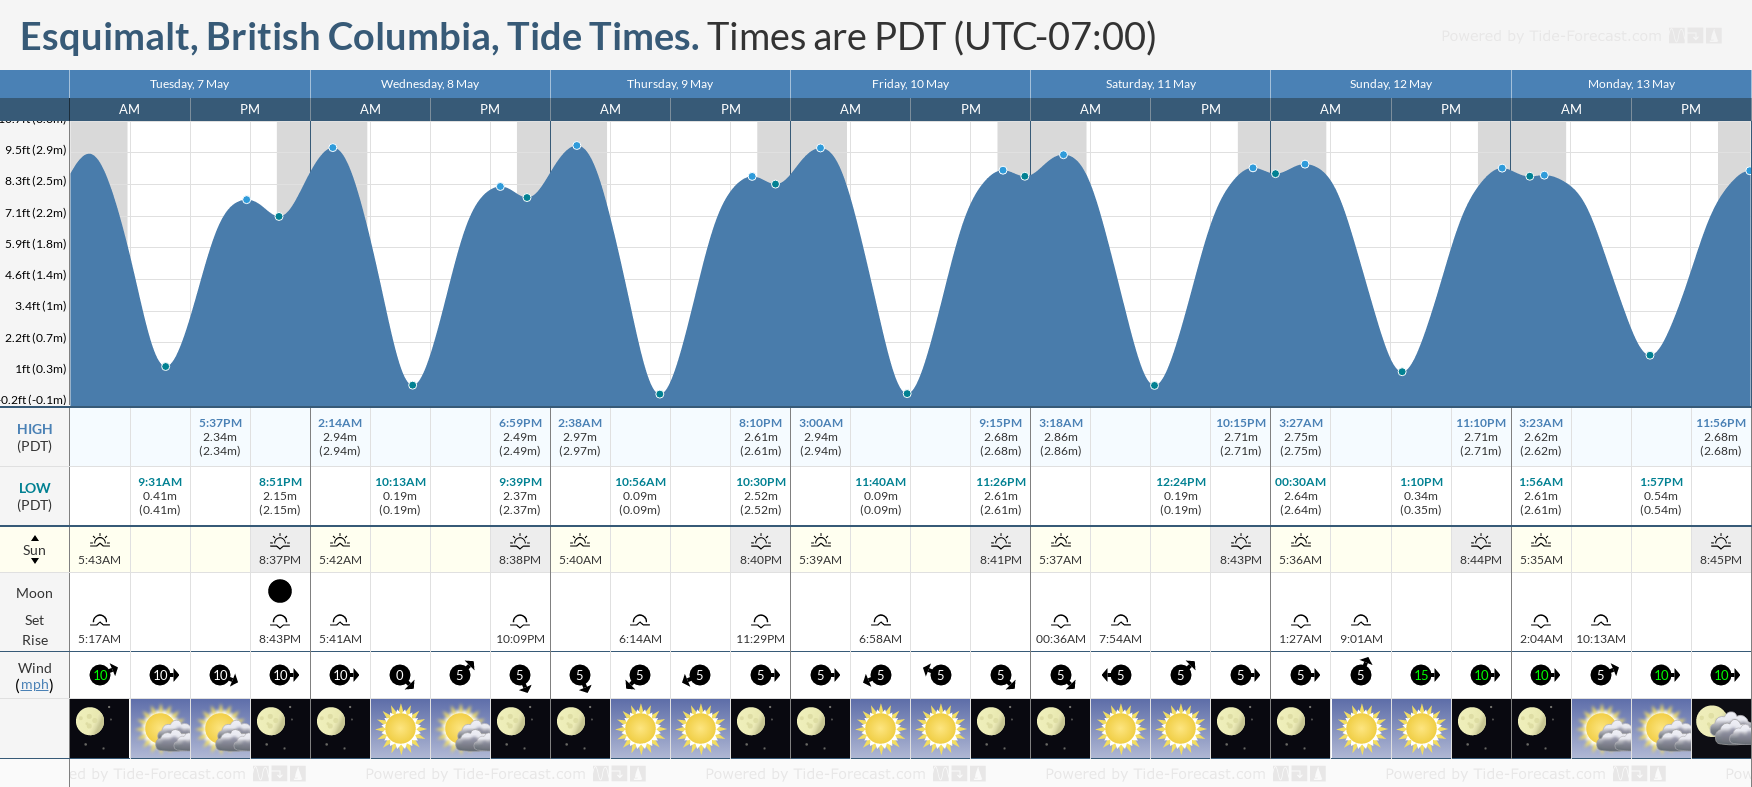 Esquimalt, British Columbia Tide Chart including high and low tide tide times for the next 7 days